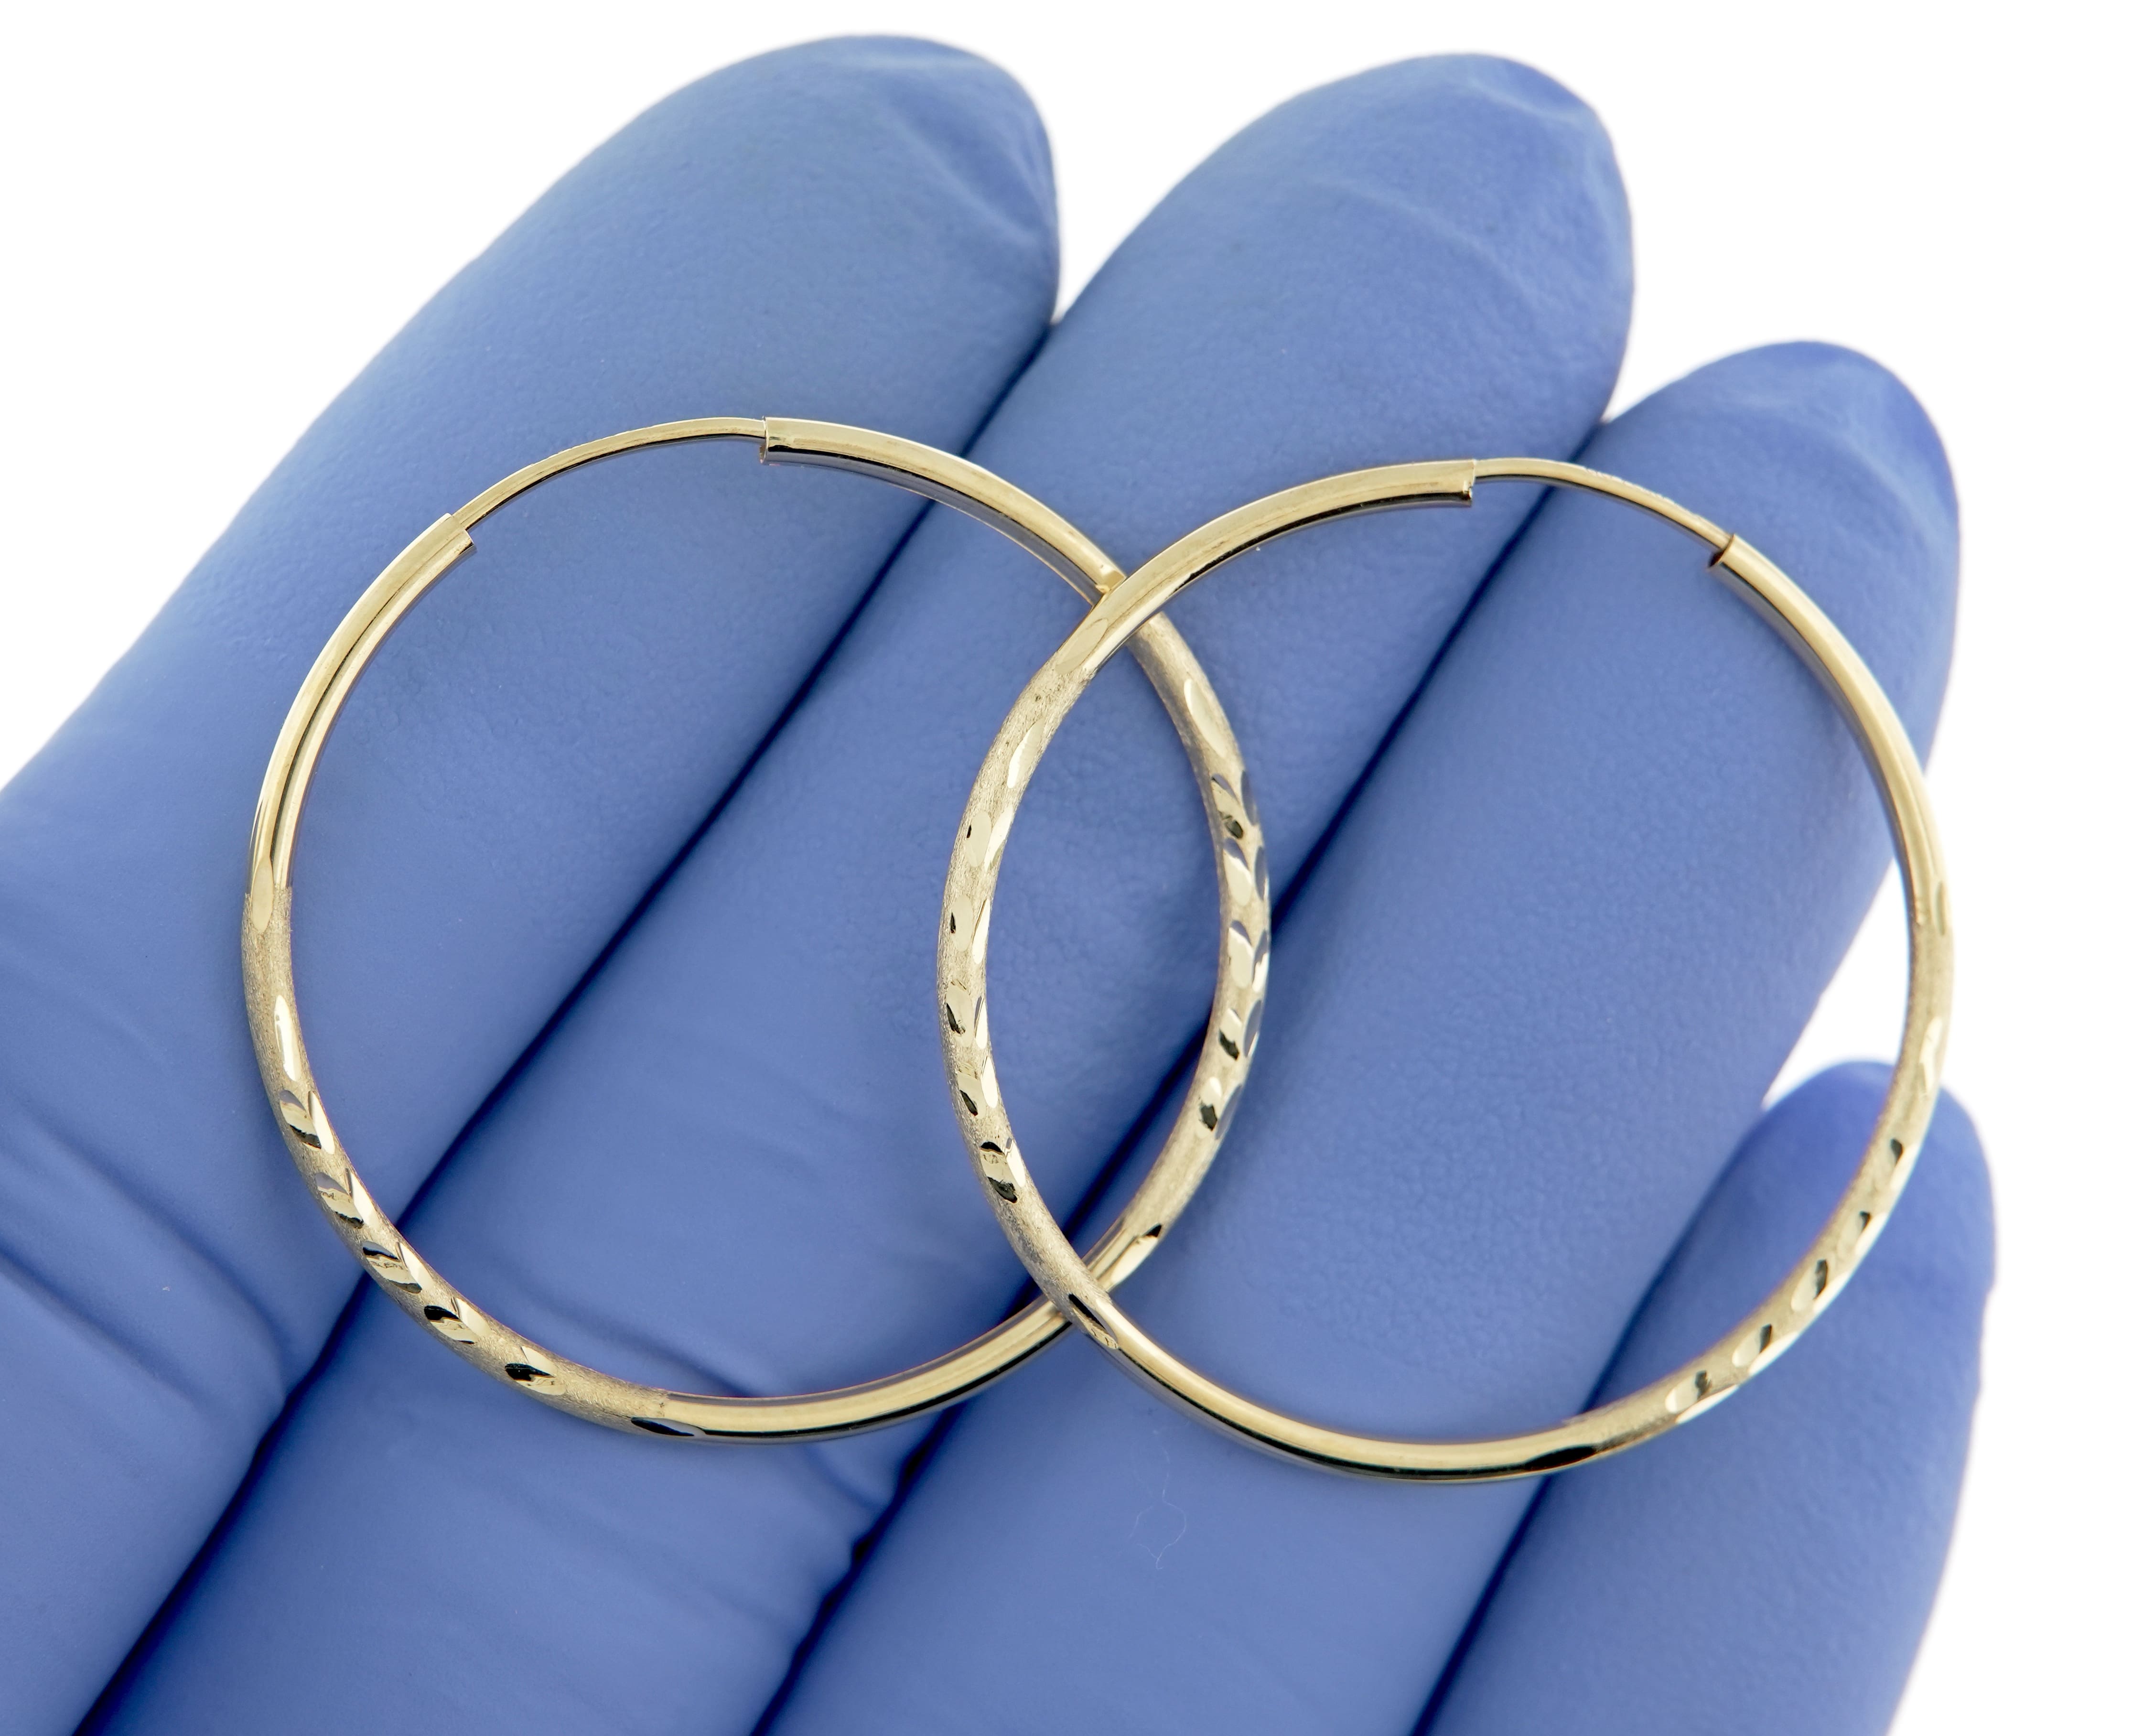 14K Yellow Gold 30mm x 1.5mm Round Endless Hoop Earrings